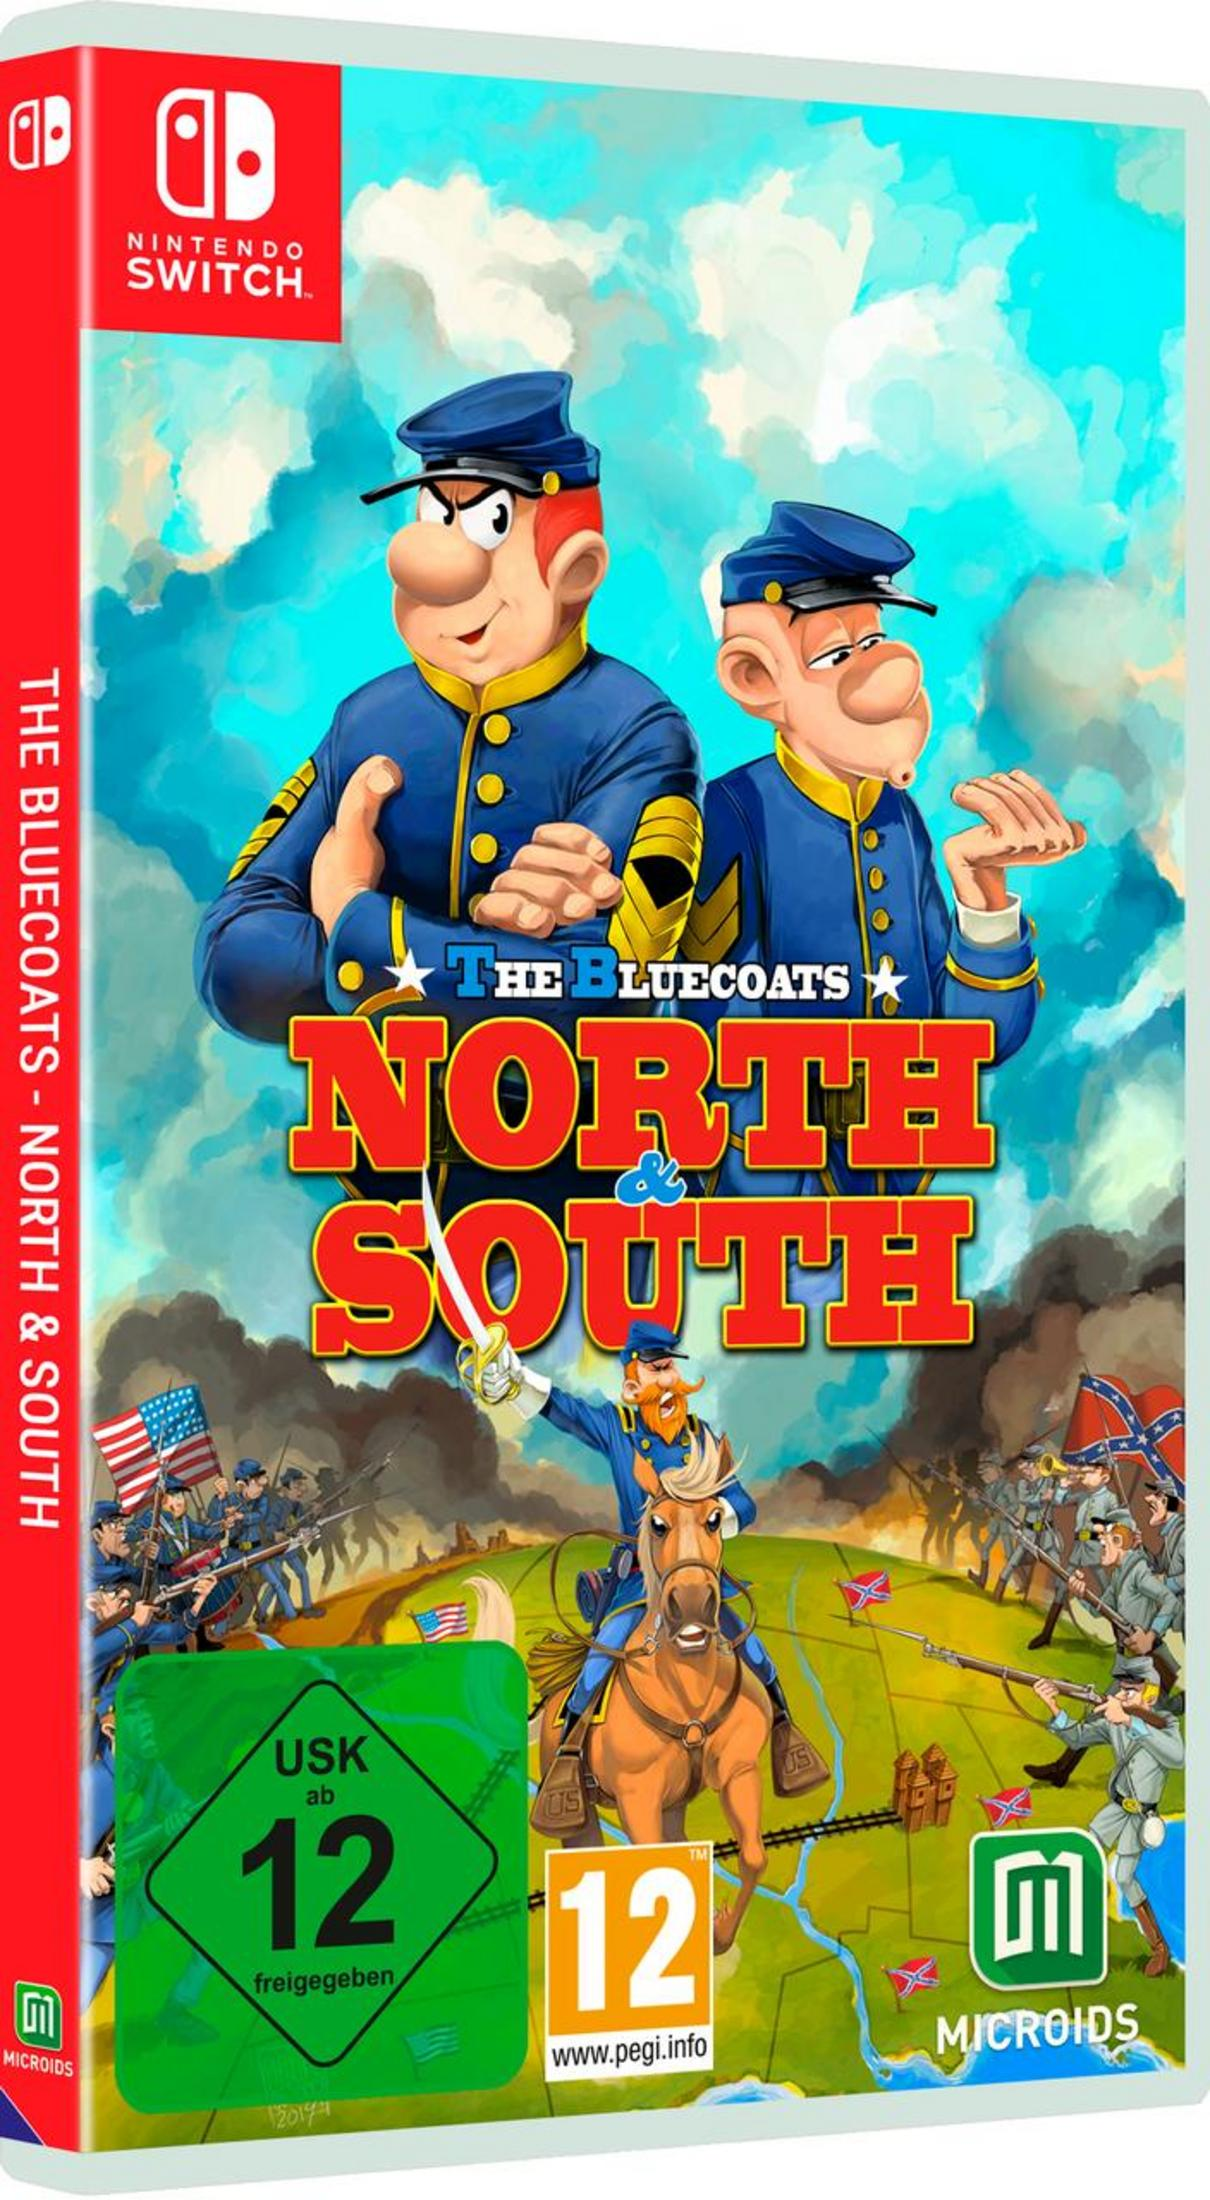 Bluecoats: and The [Nintendo North Switch] South -